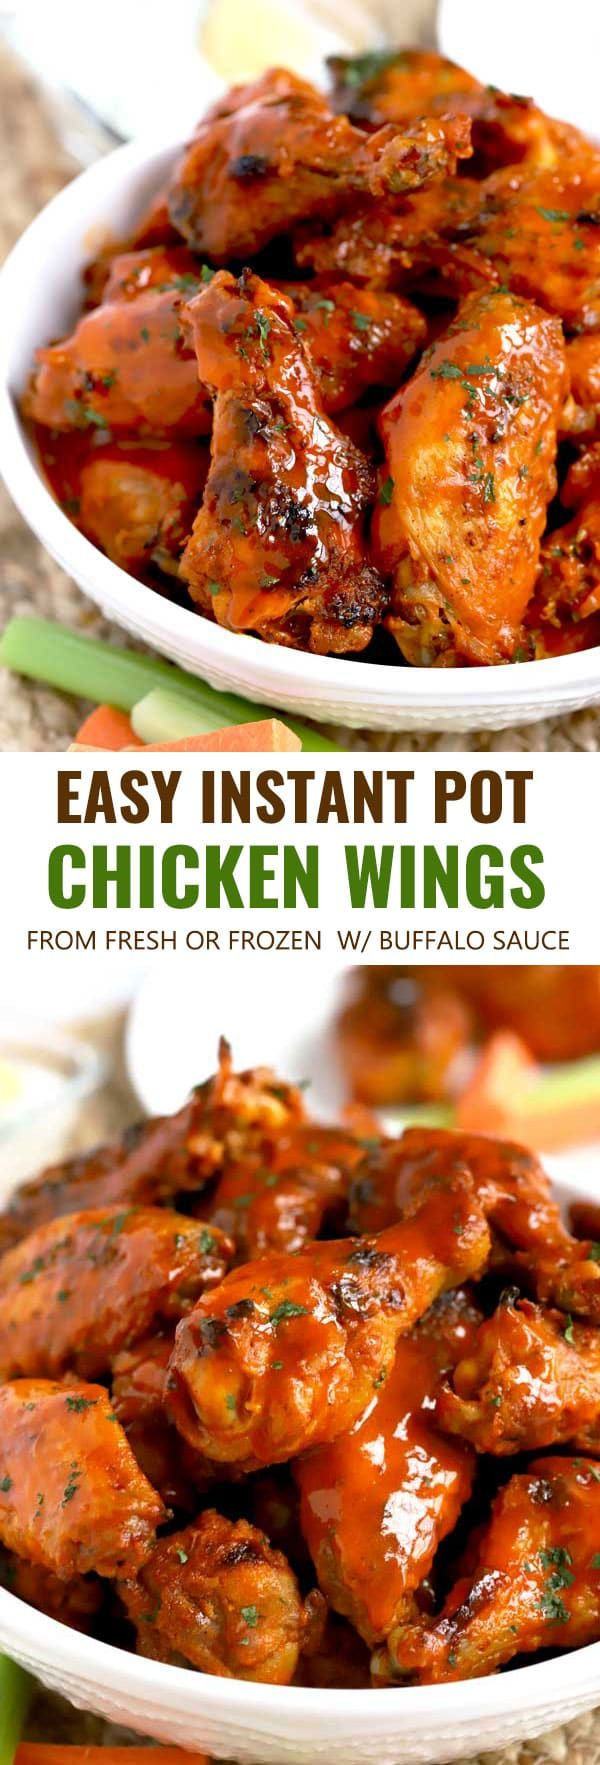 Frozen Chicken Wings In Pressure Cooker Recipe
 Instant Pot Chicken Wings made from fresh or frozen